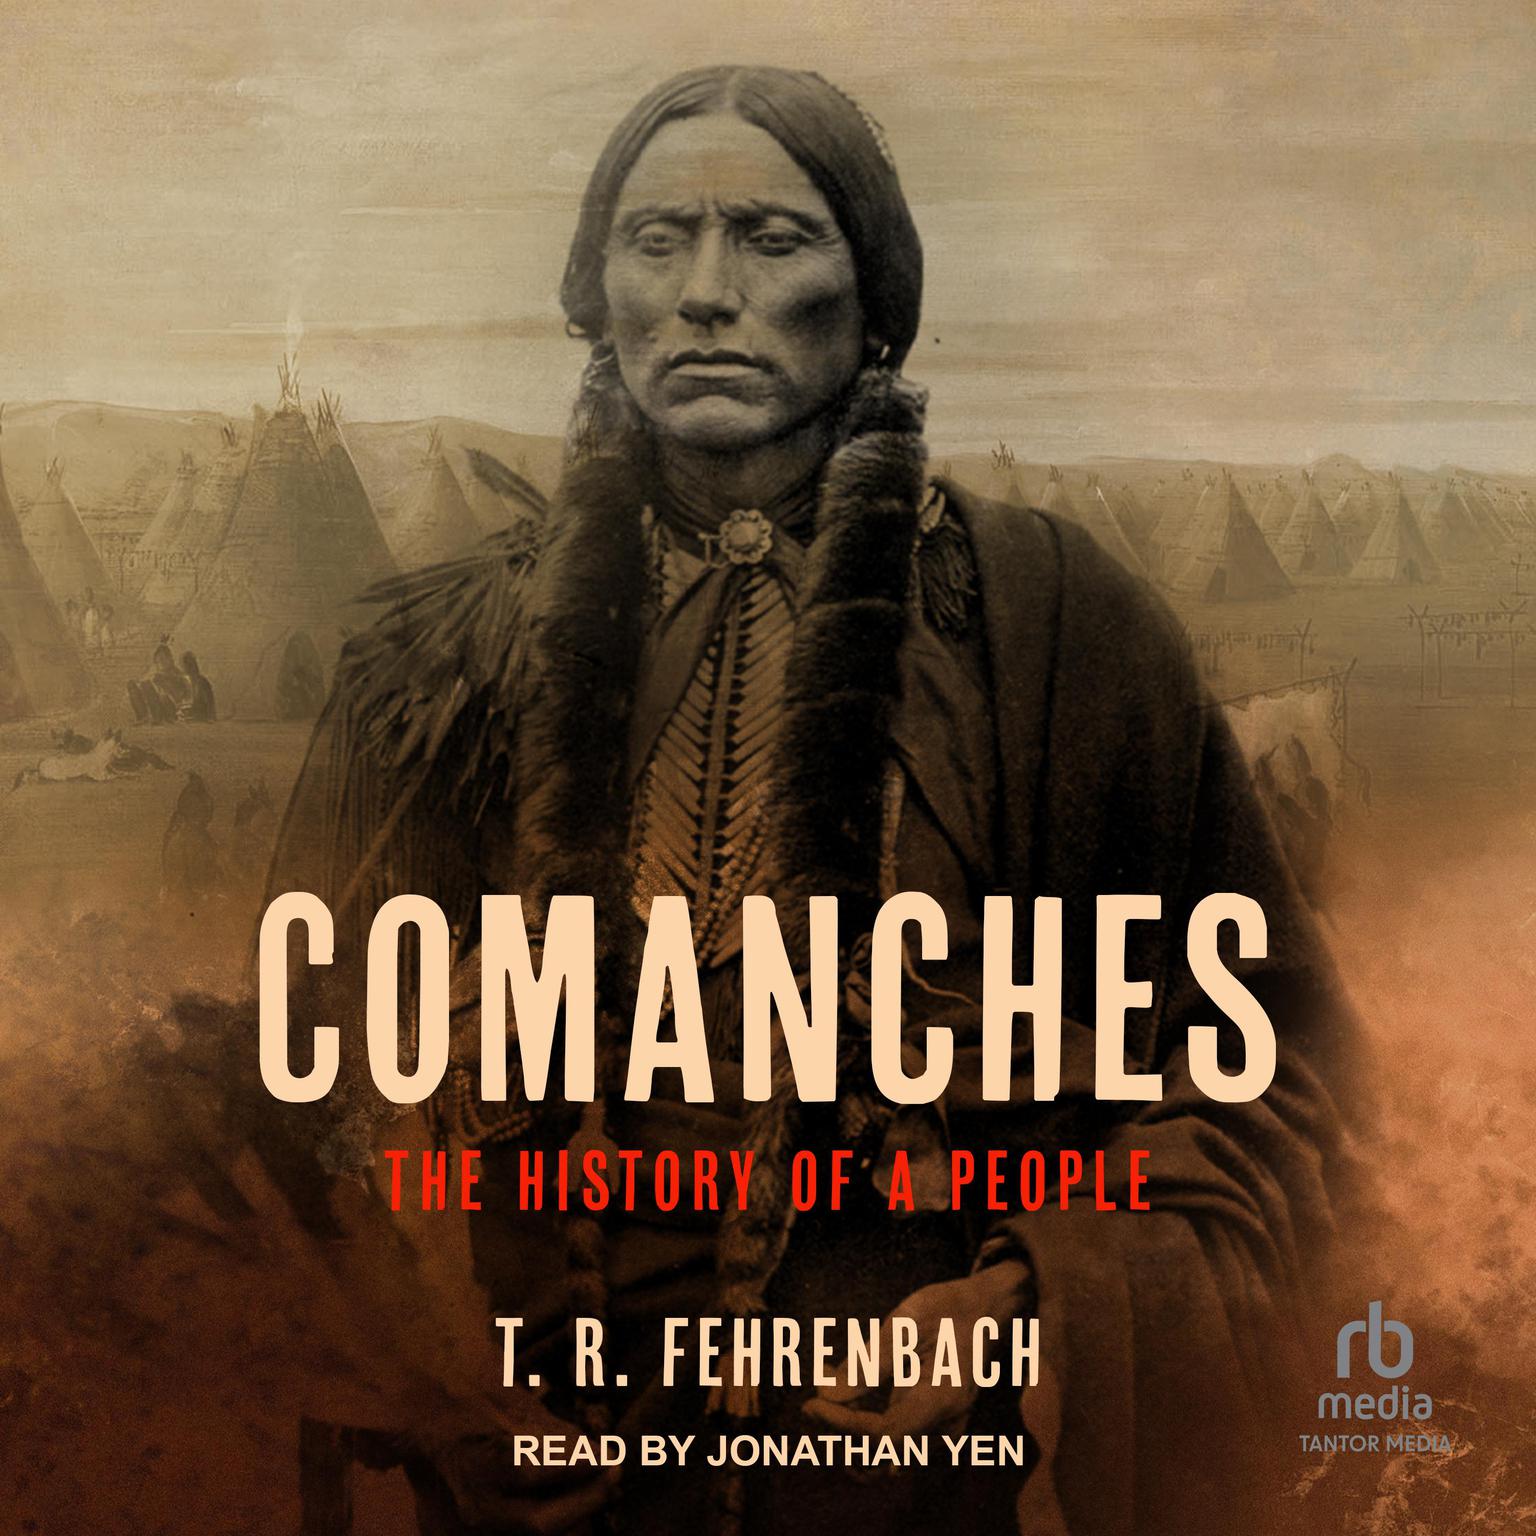 Comanches: The History of a People Audiobook, by T. R. Fehrenbach